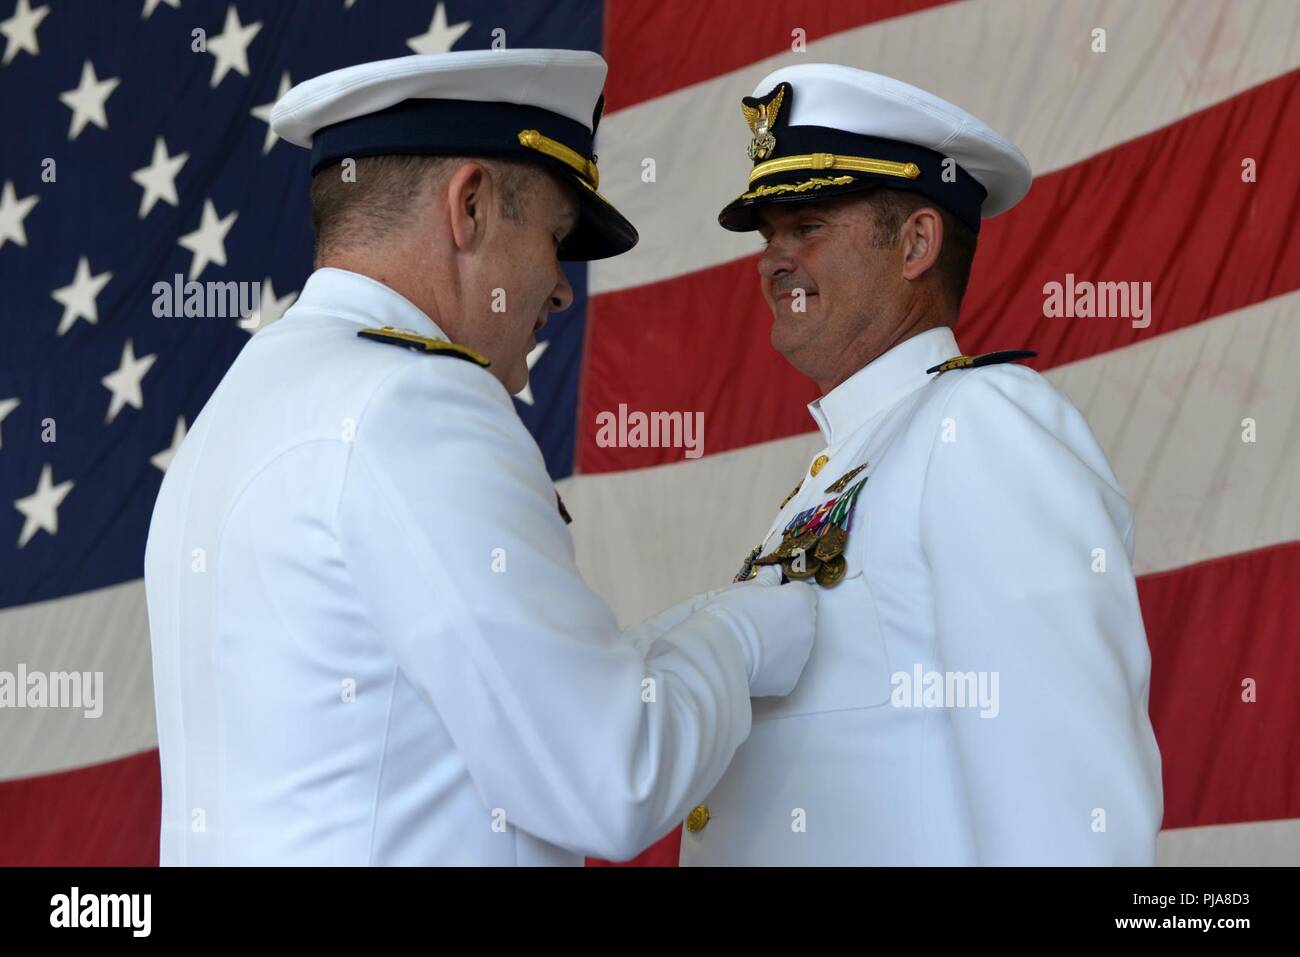 U.S. Coast Guard Capt. Frederick C. Riedlin is presented with a Meritorious Service Medal by Rear Adm. Brian Penoyer at Coast Guard Air Station Barbers Point, July 6, 2018. Riedlin received the medal at a change of command ceremony after which he is transferring to become the Coast Guard Chief of the Office of Aviation Forces (CG-711). Stock Photo